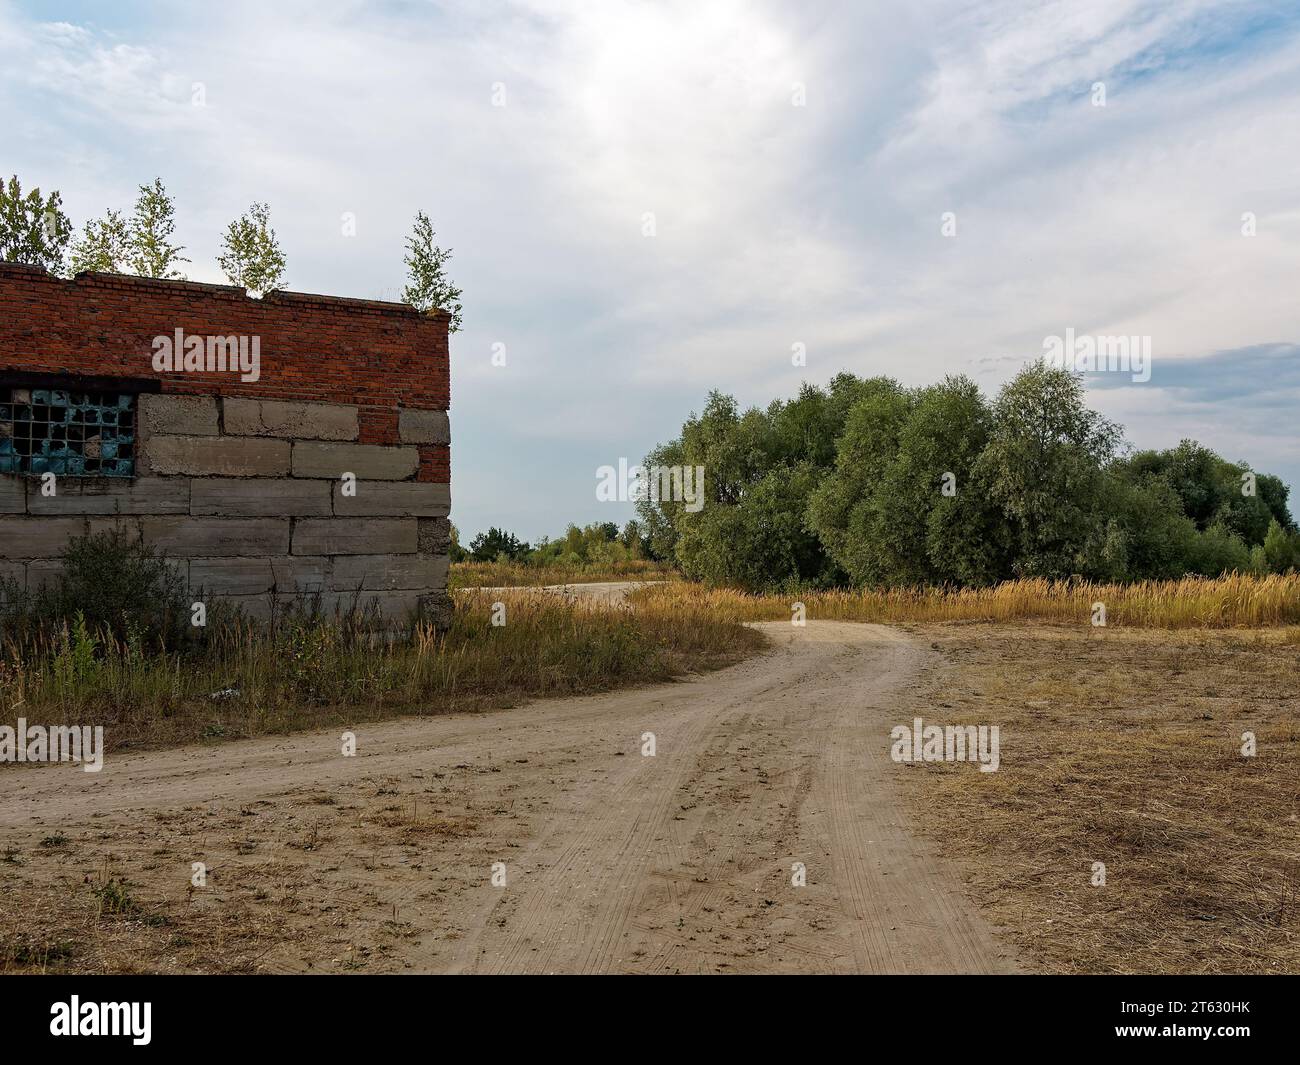 Abandoned one-storey brick building, Russia Stock Photo